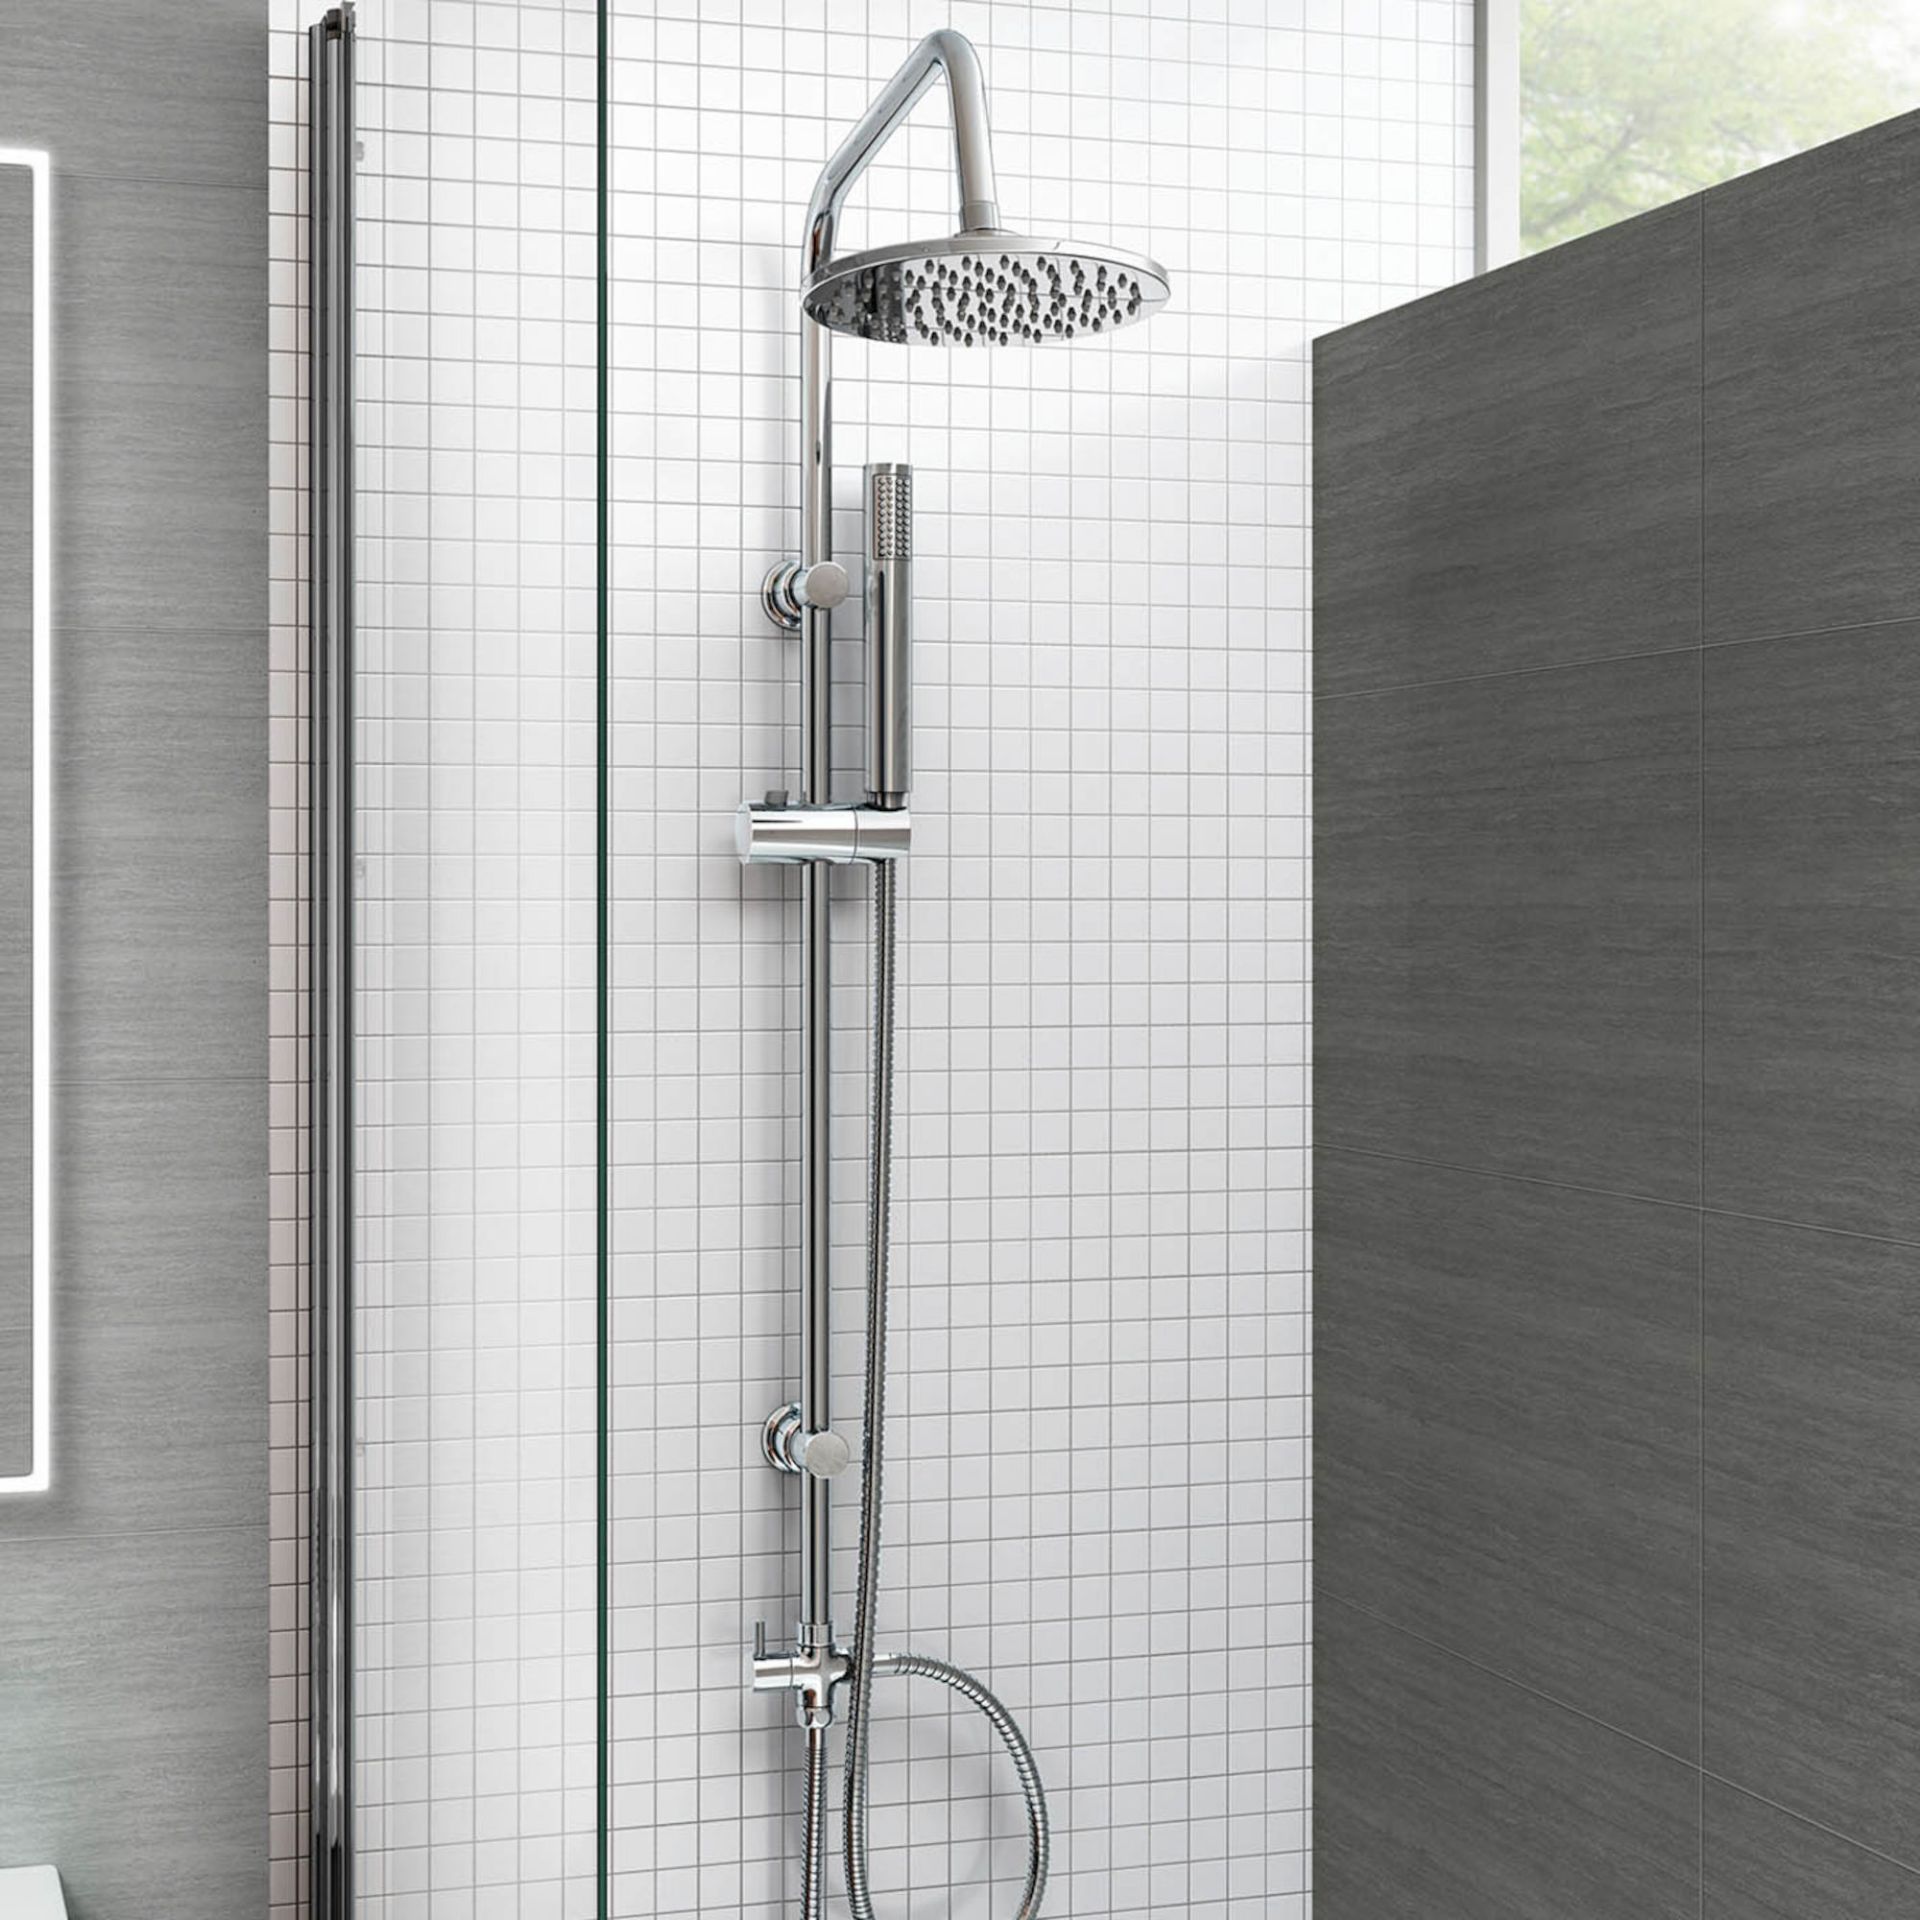 (EY203) 200mm Round Head, Riser Rail & Handheld Kit. Quality stainless steel shower head with Easy